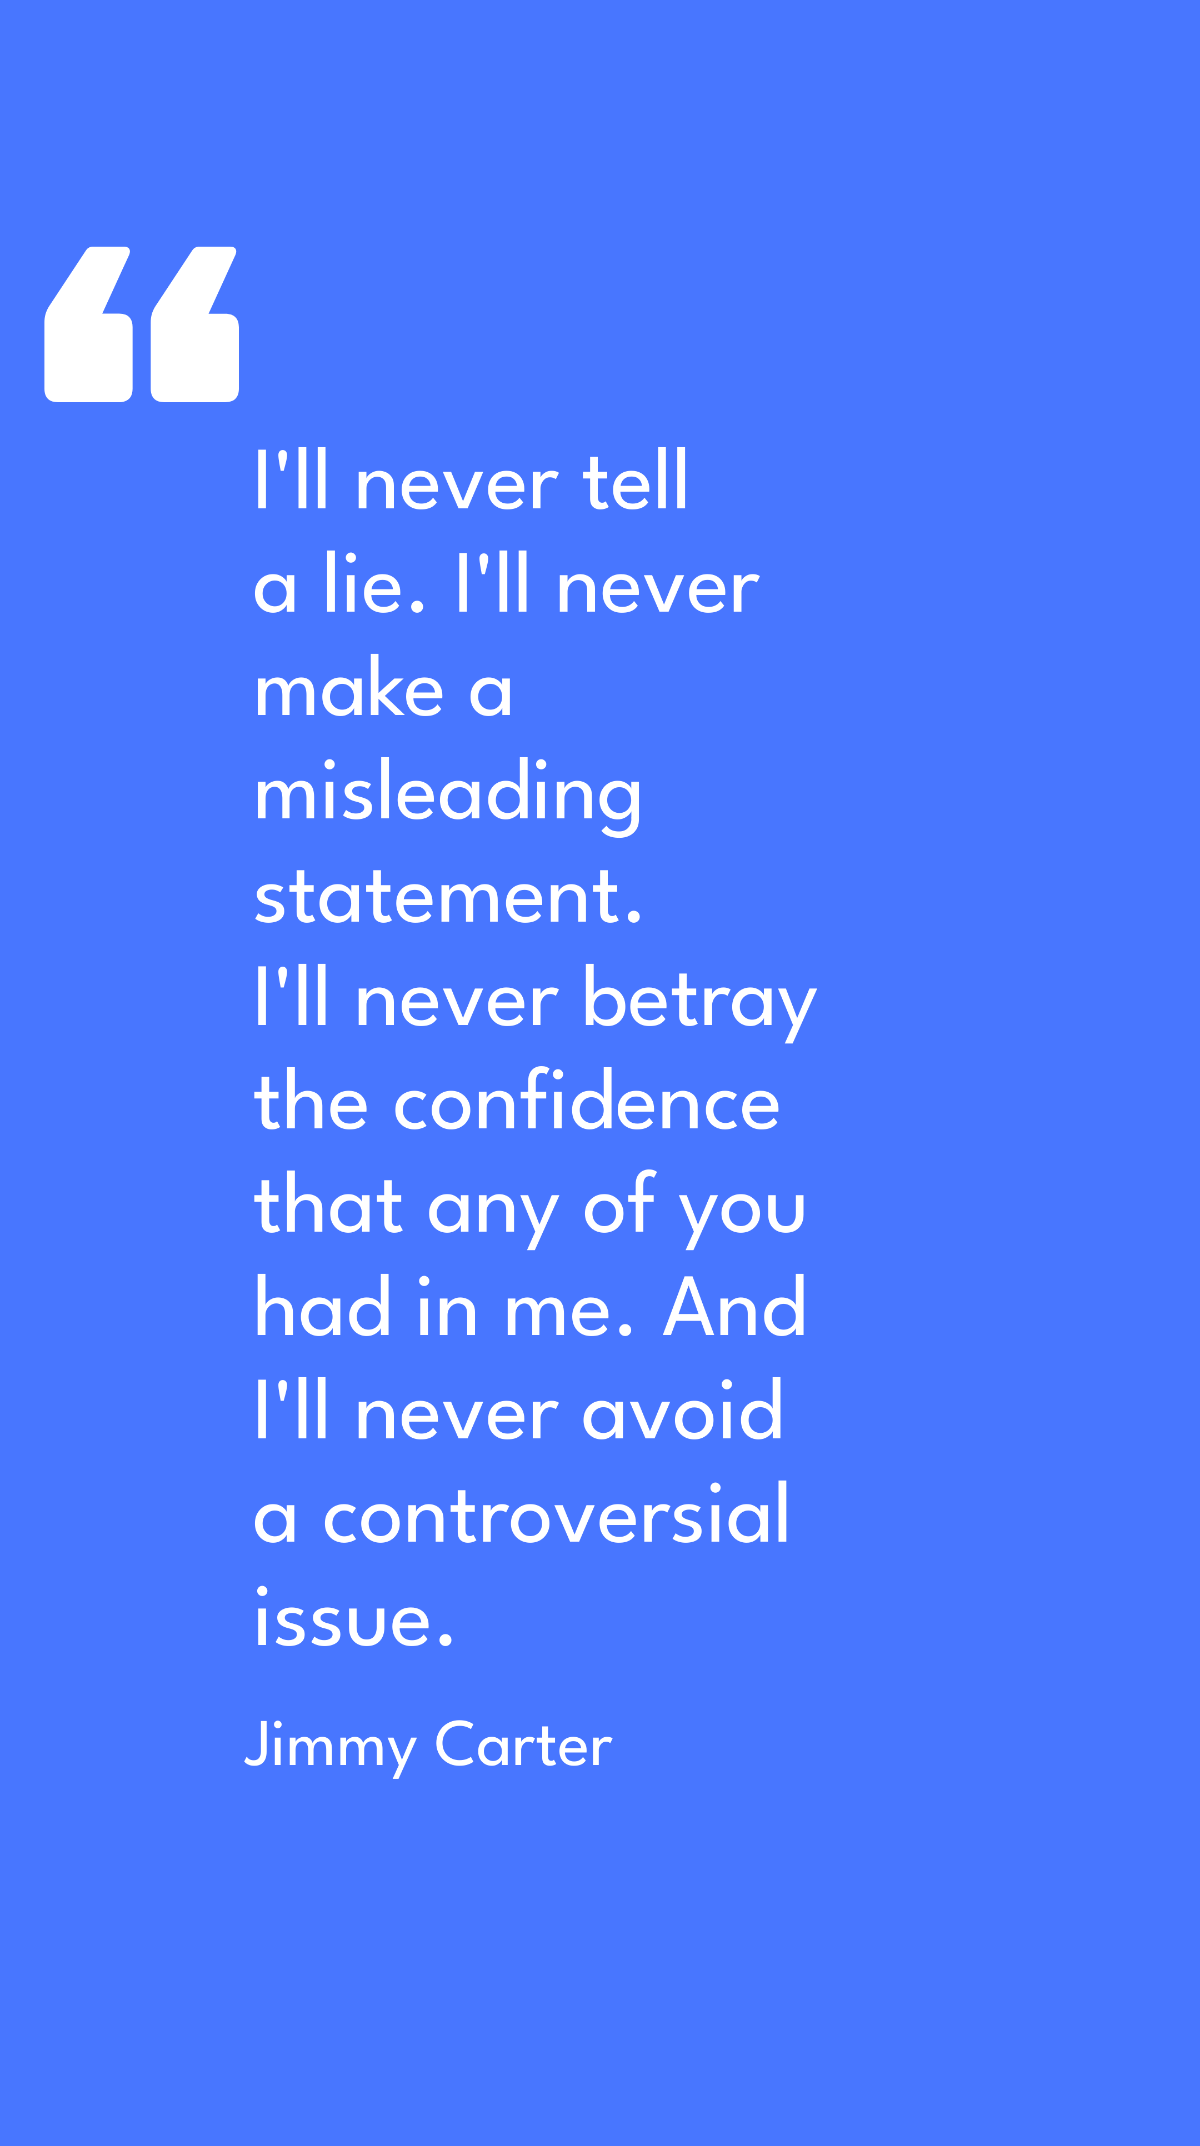 Jimmy Carter - I'll never tell a lie. I'll never make a misleading statement. I'll never betray the confidence that any of you had in me. And I'll never avoid a controversial issue. Template